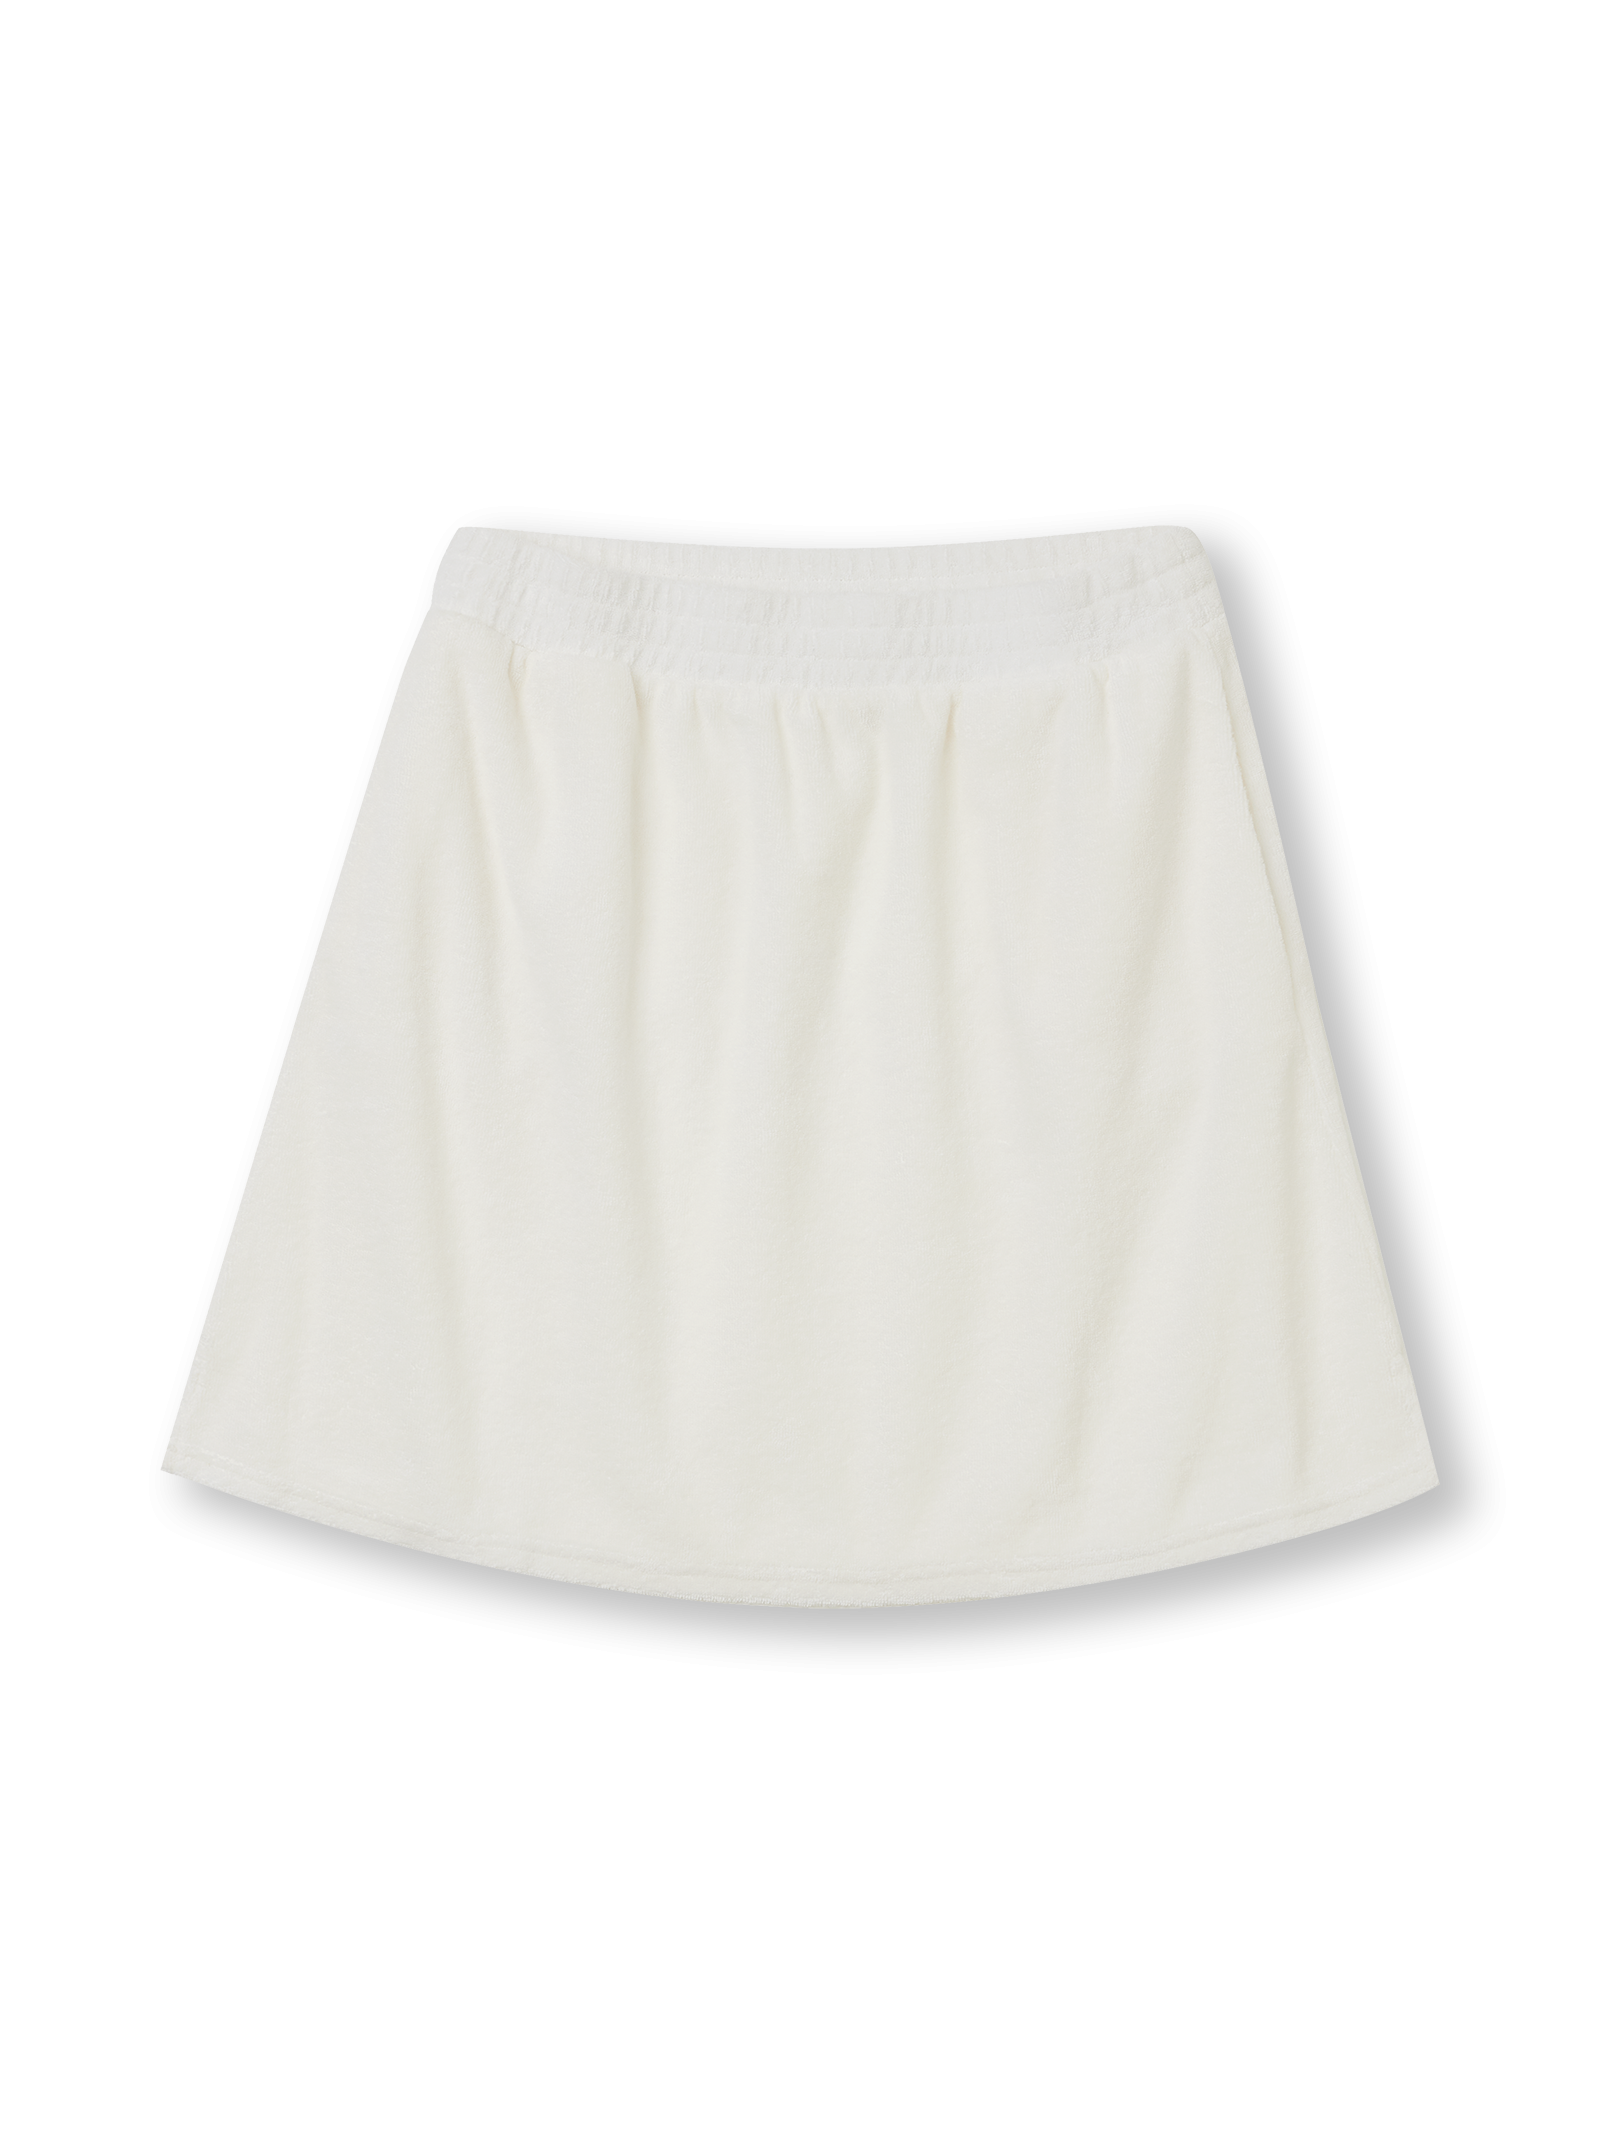 Girls Women High Waisted Plain Pleated Skirt with Underpants Skater Tennis  School Uniforms A-line Mini Skirts (Solid White, XS) at Amazon Women's  Clothing store